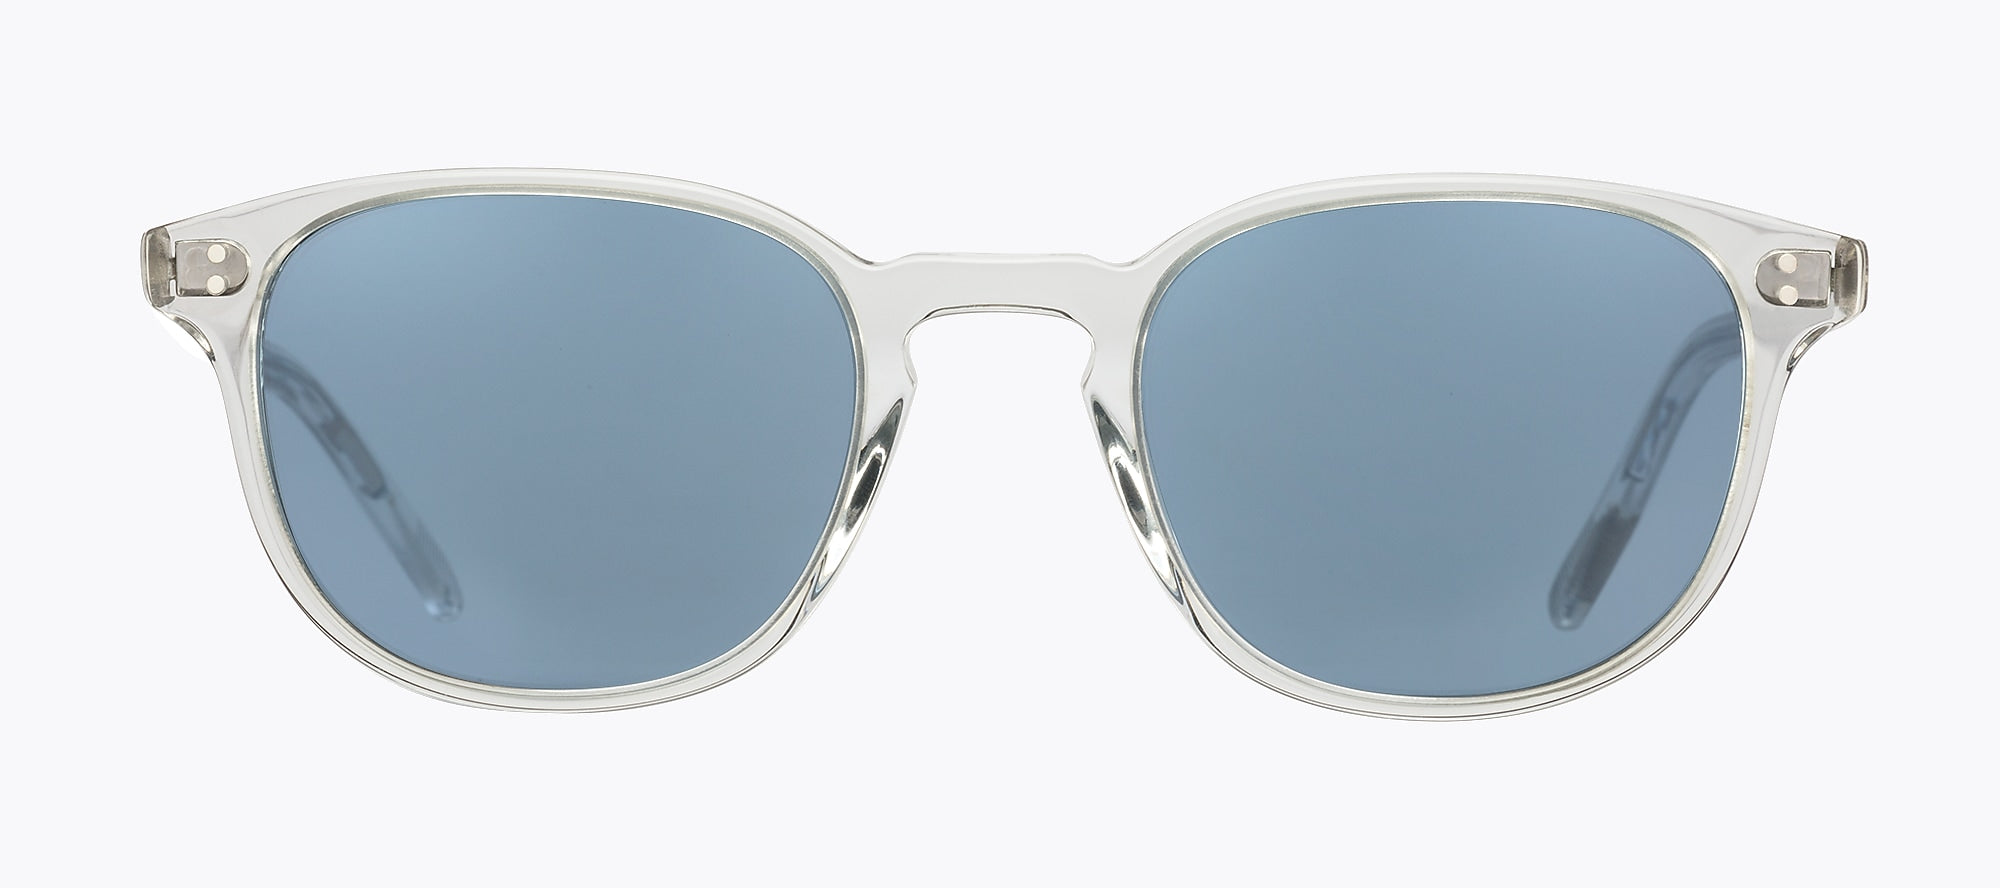 Oliver Peoples Fairmont